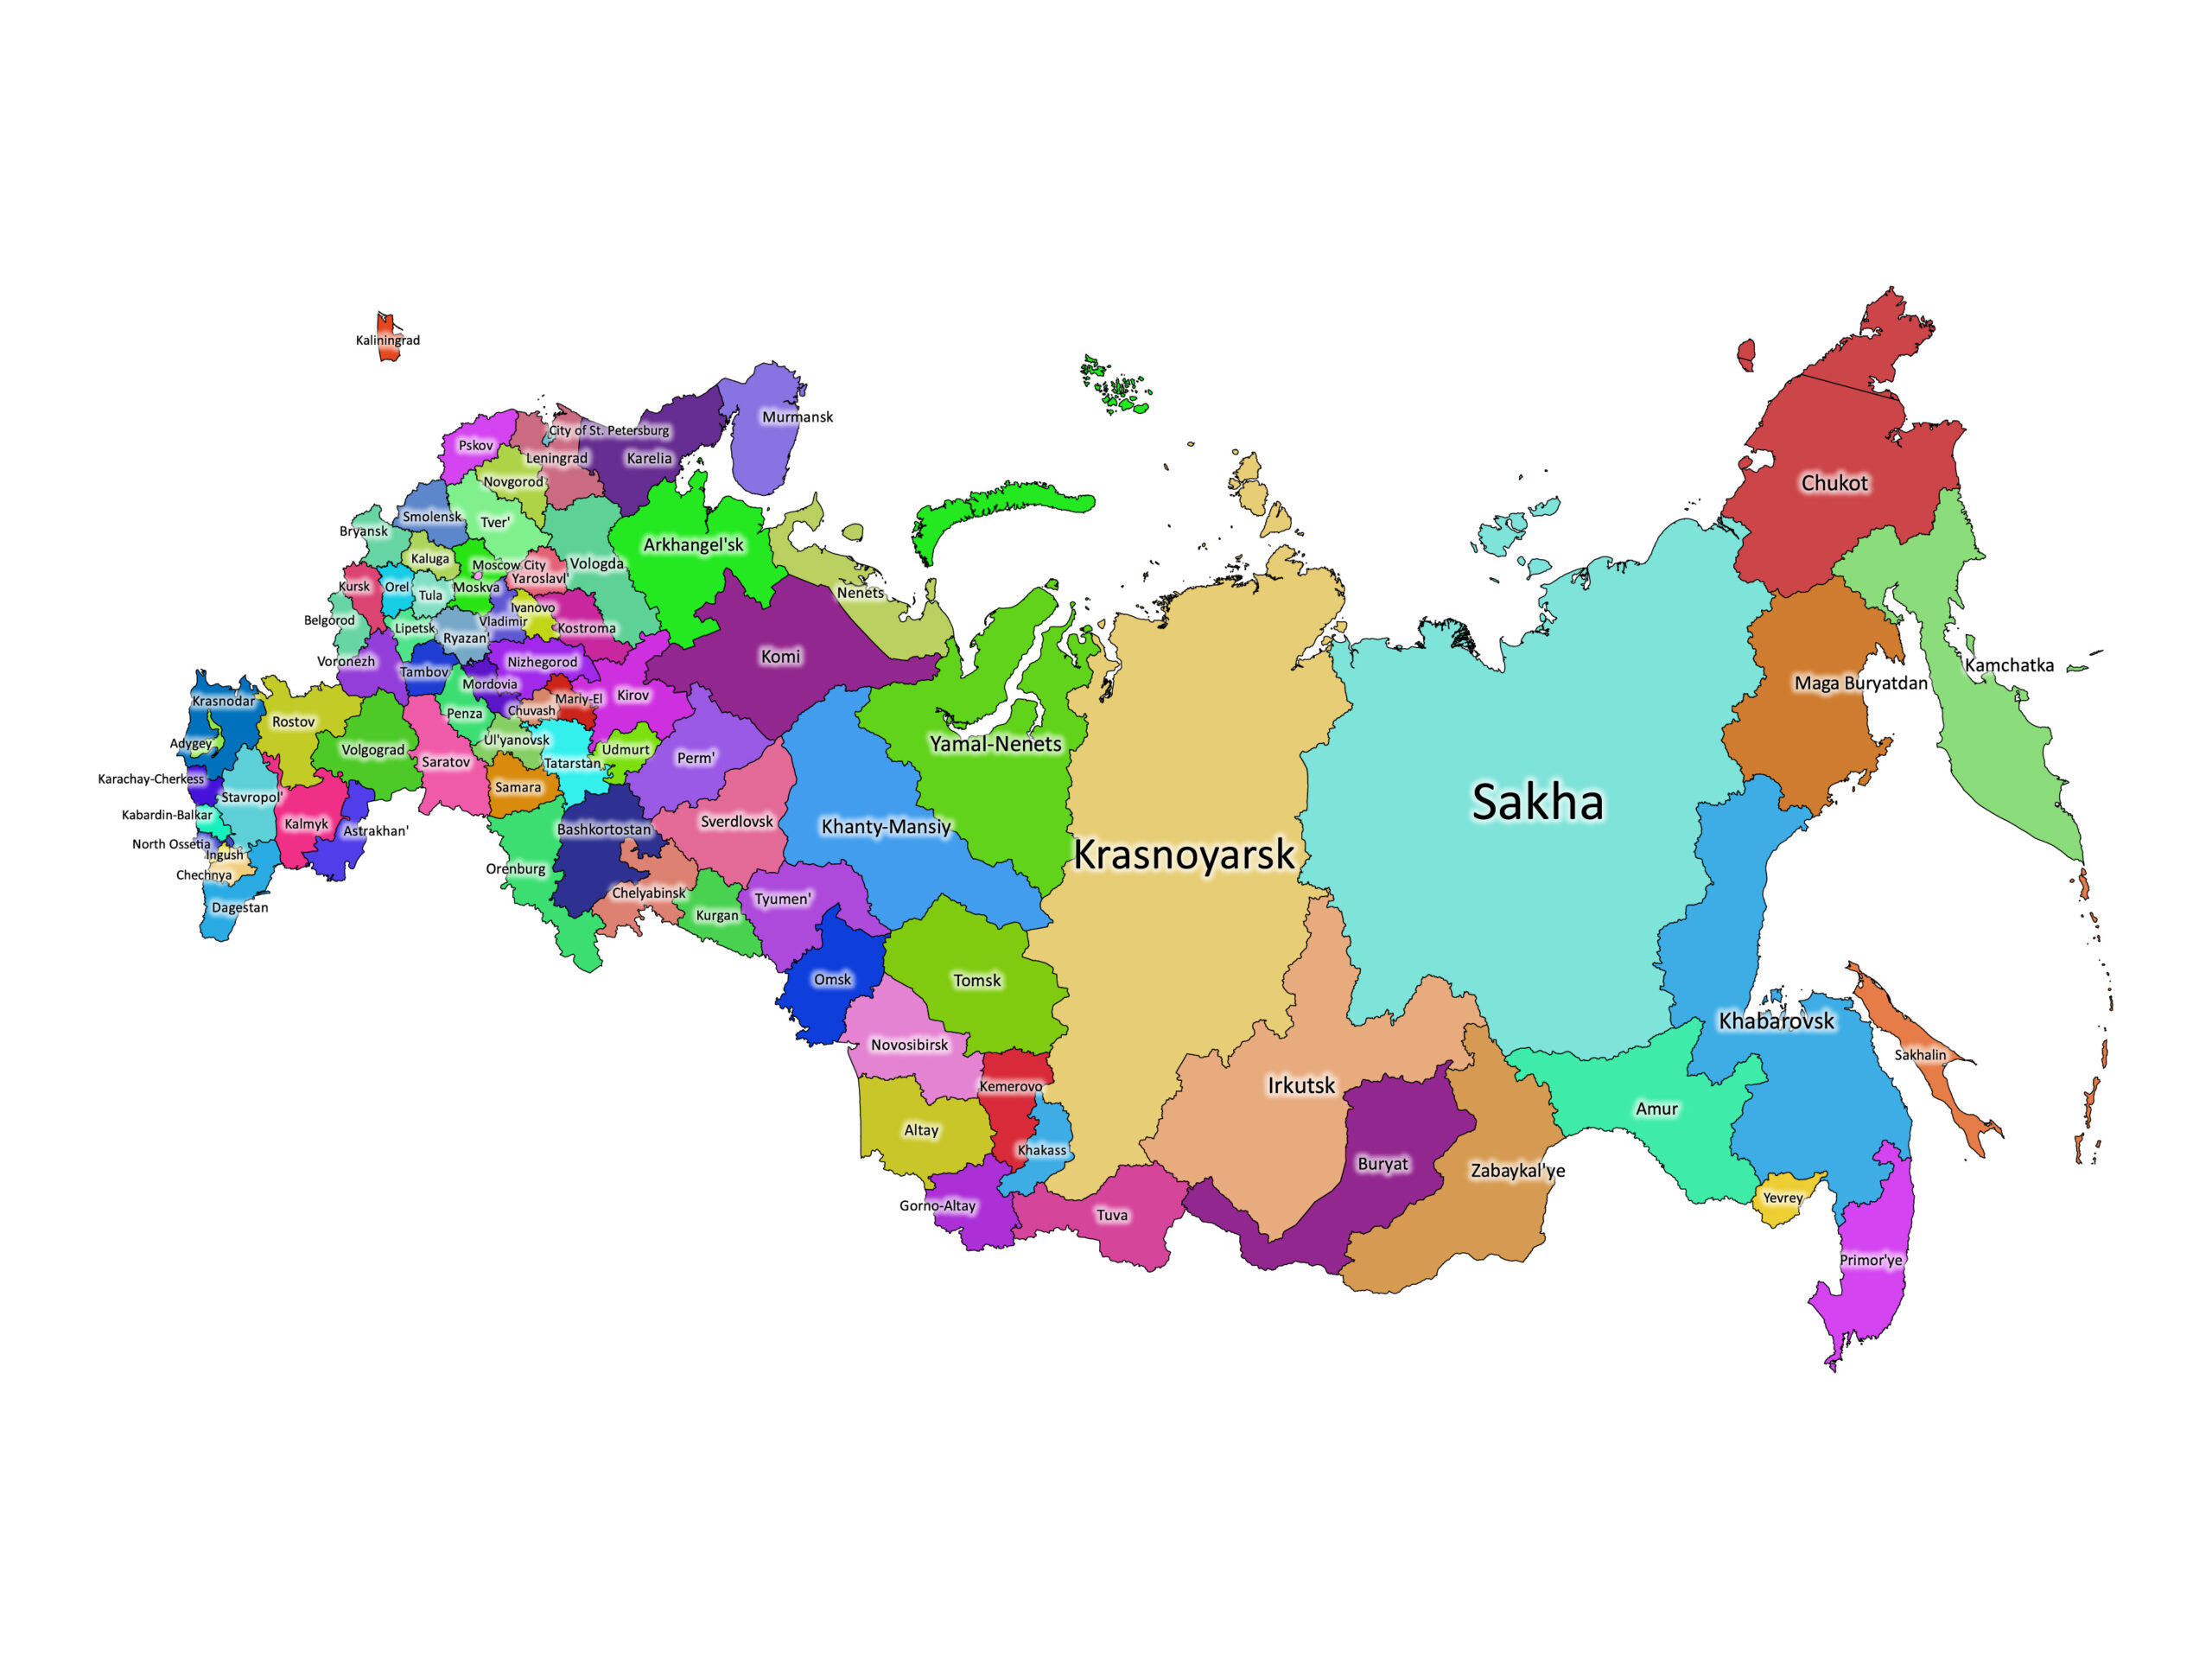 Russia labeled map | Labeled Maps